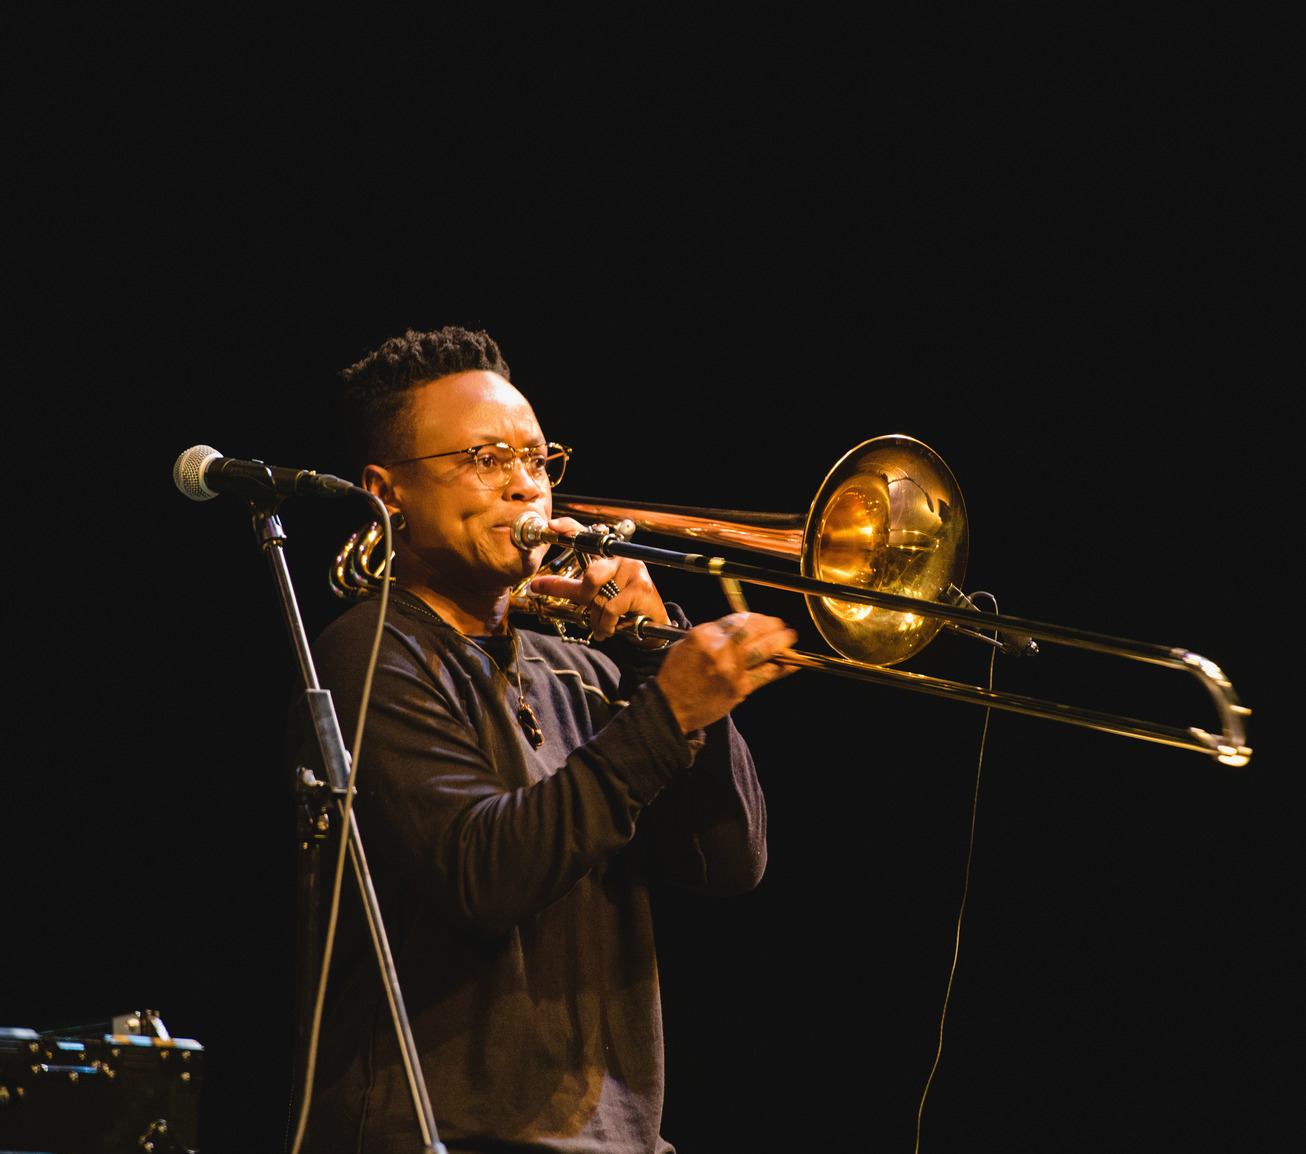 A student performing with trombone